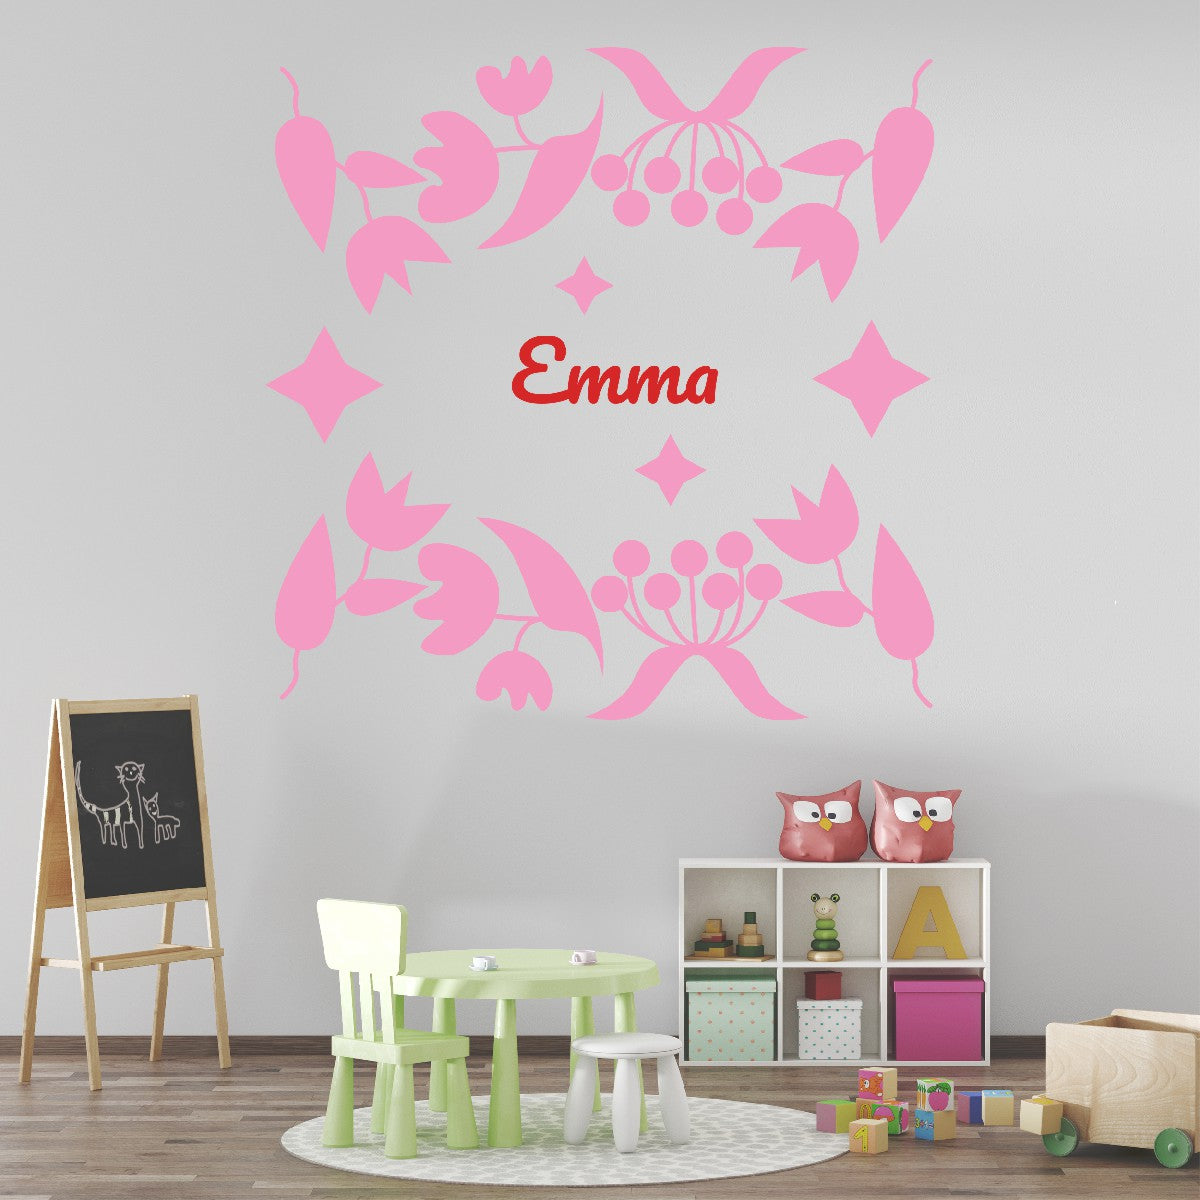 Personalized Name Stickers with Flowers Berries Leaves - Durable Name Decals for Walls Doors Furniture Laptop - Modern Custom Name Stickers for Kids Bedroom